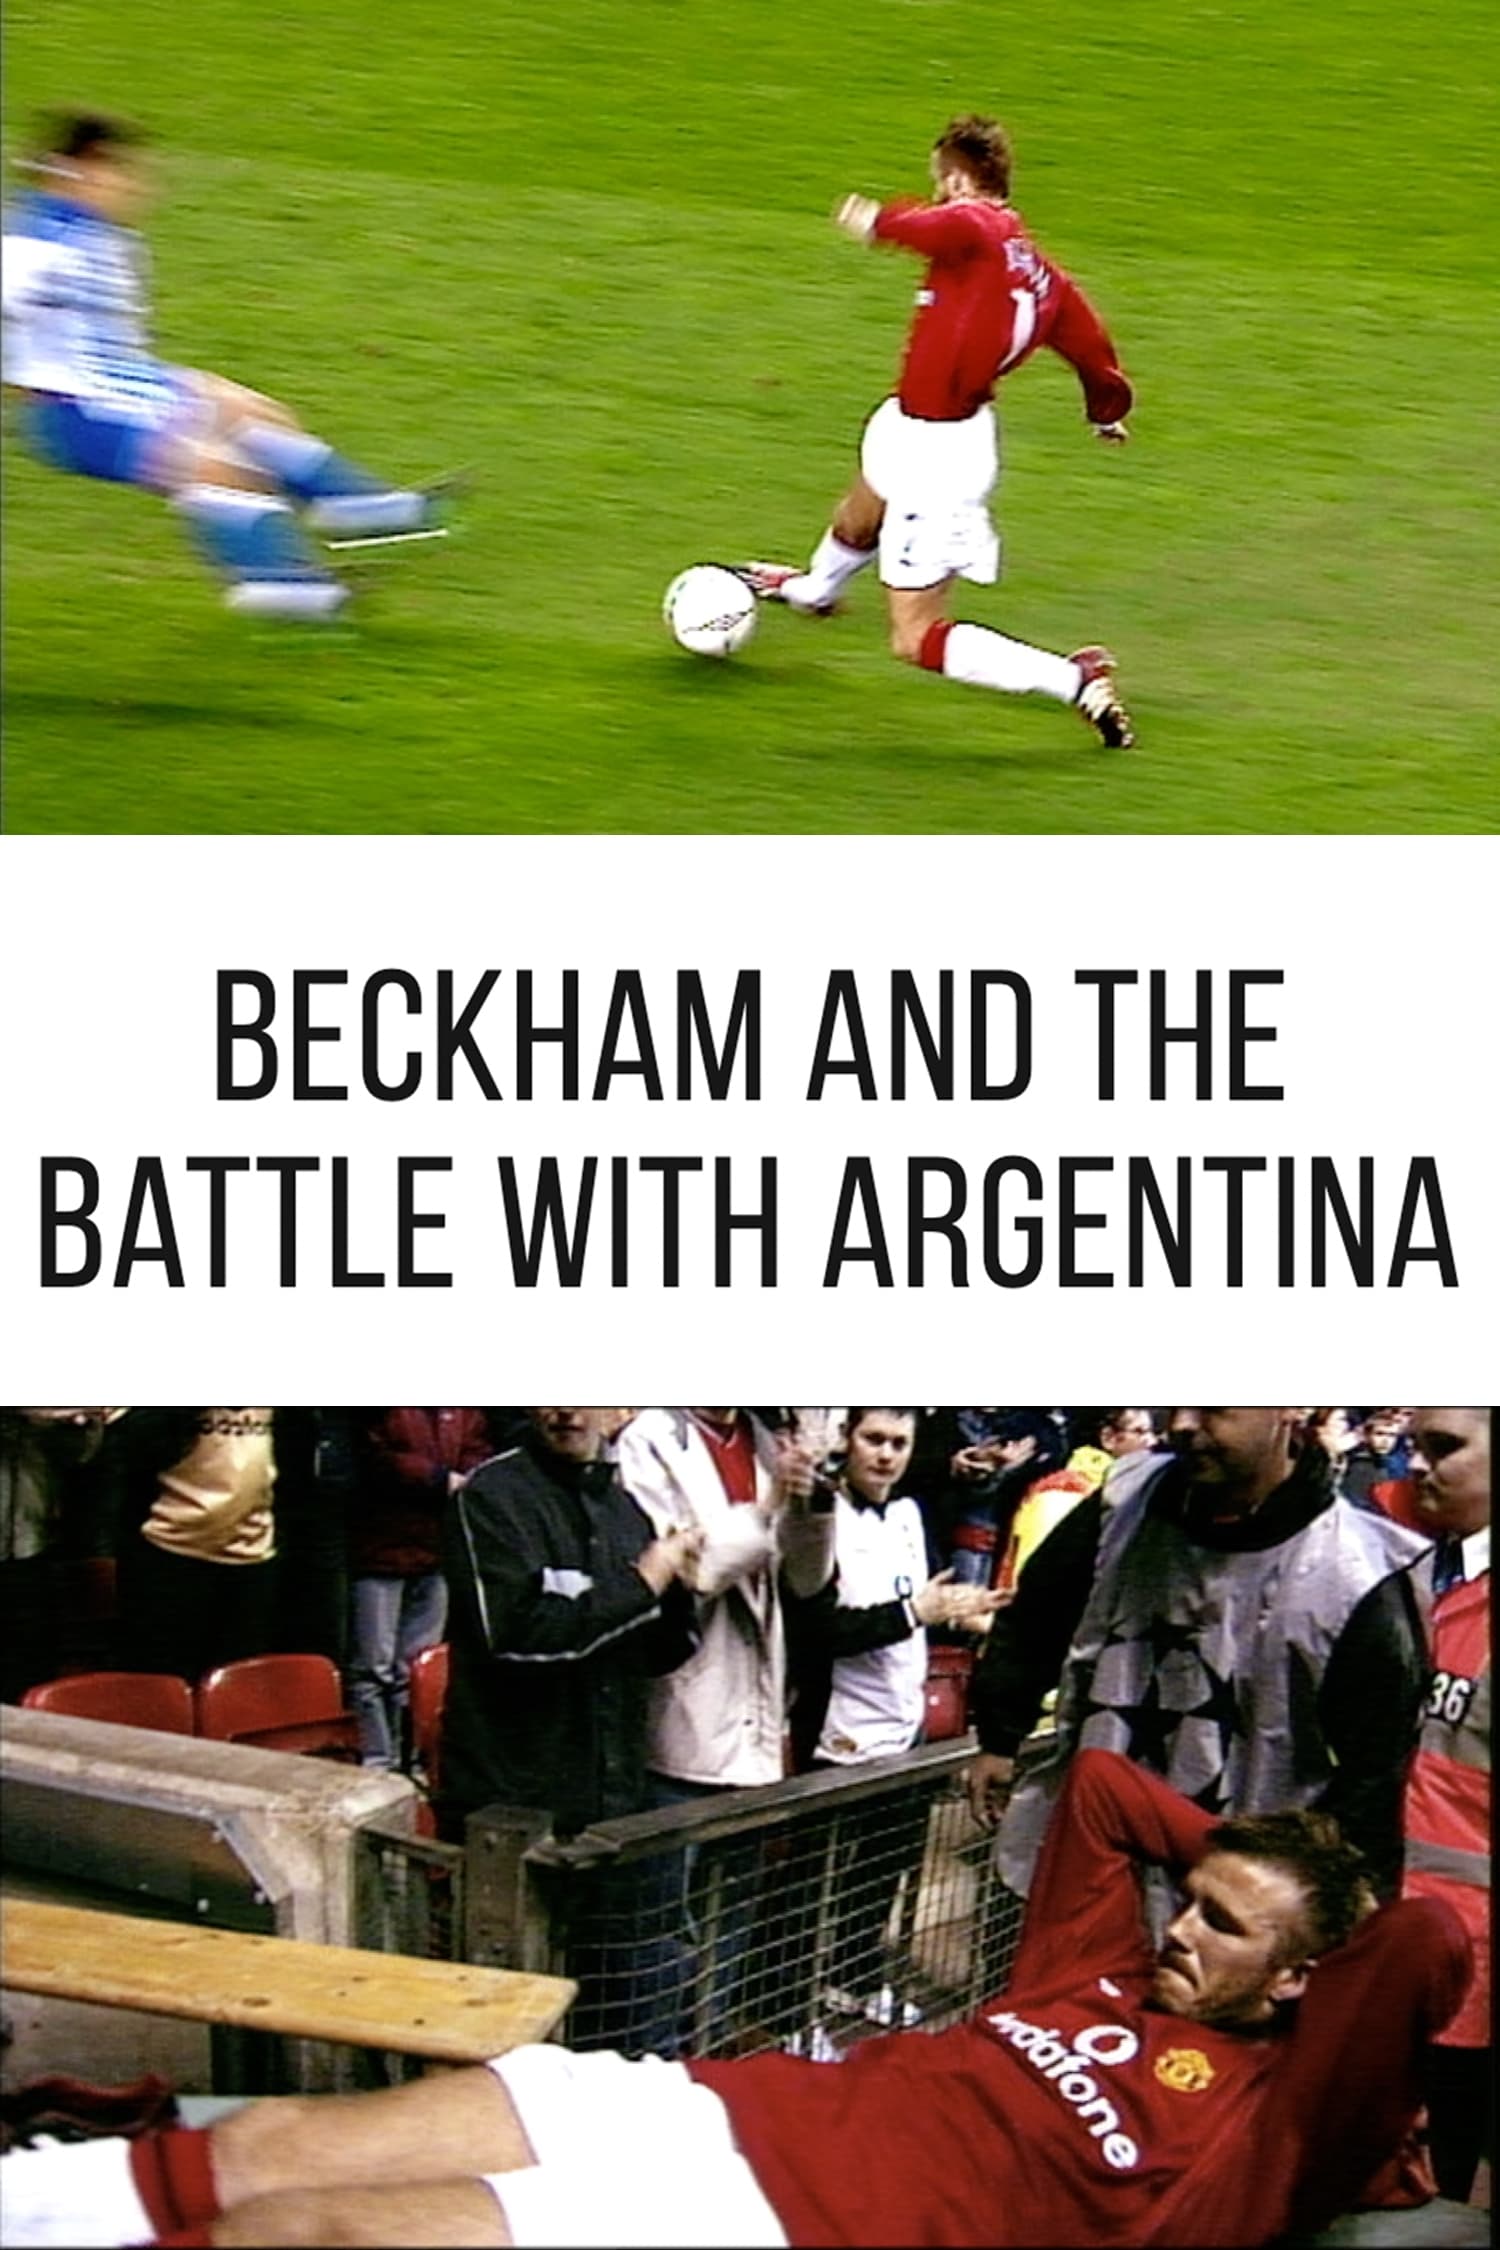 Beckham and the Battle with Argentina